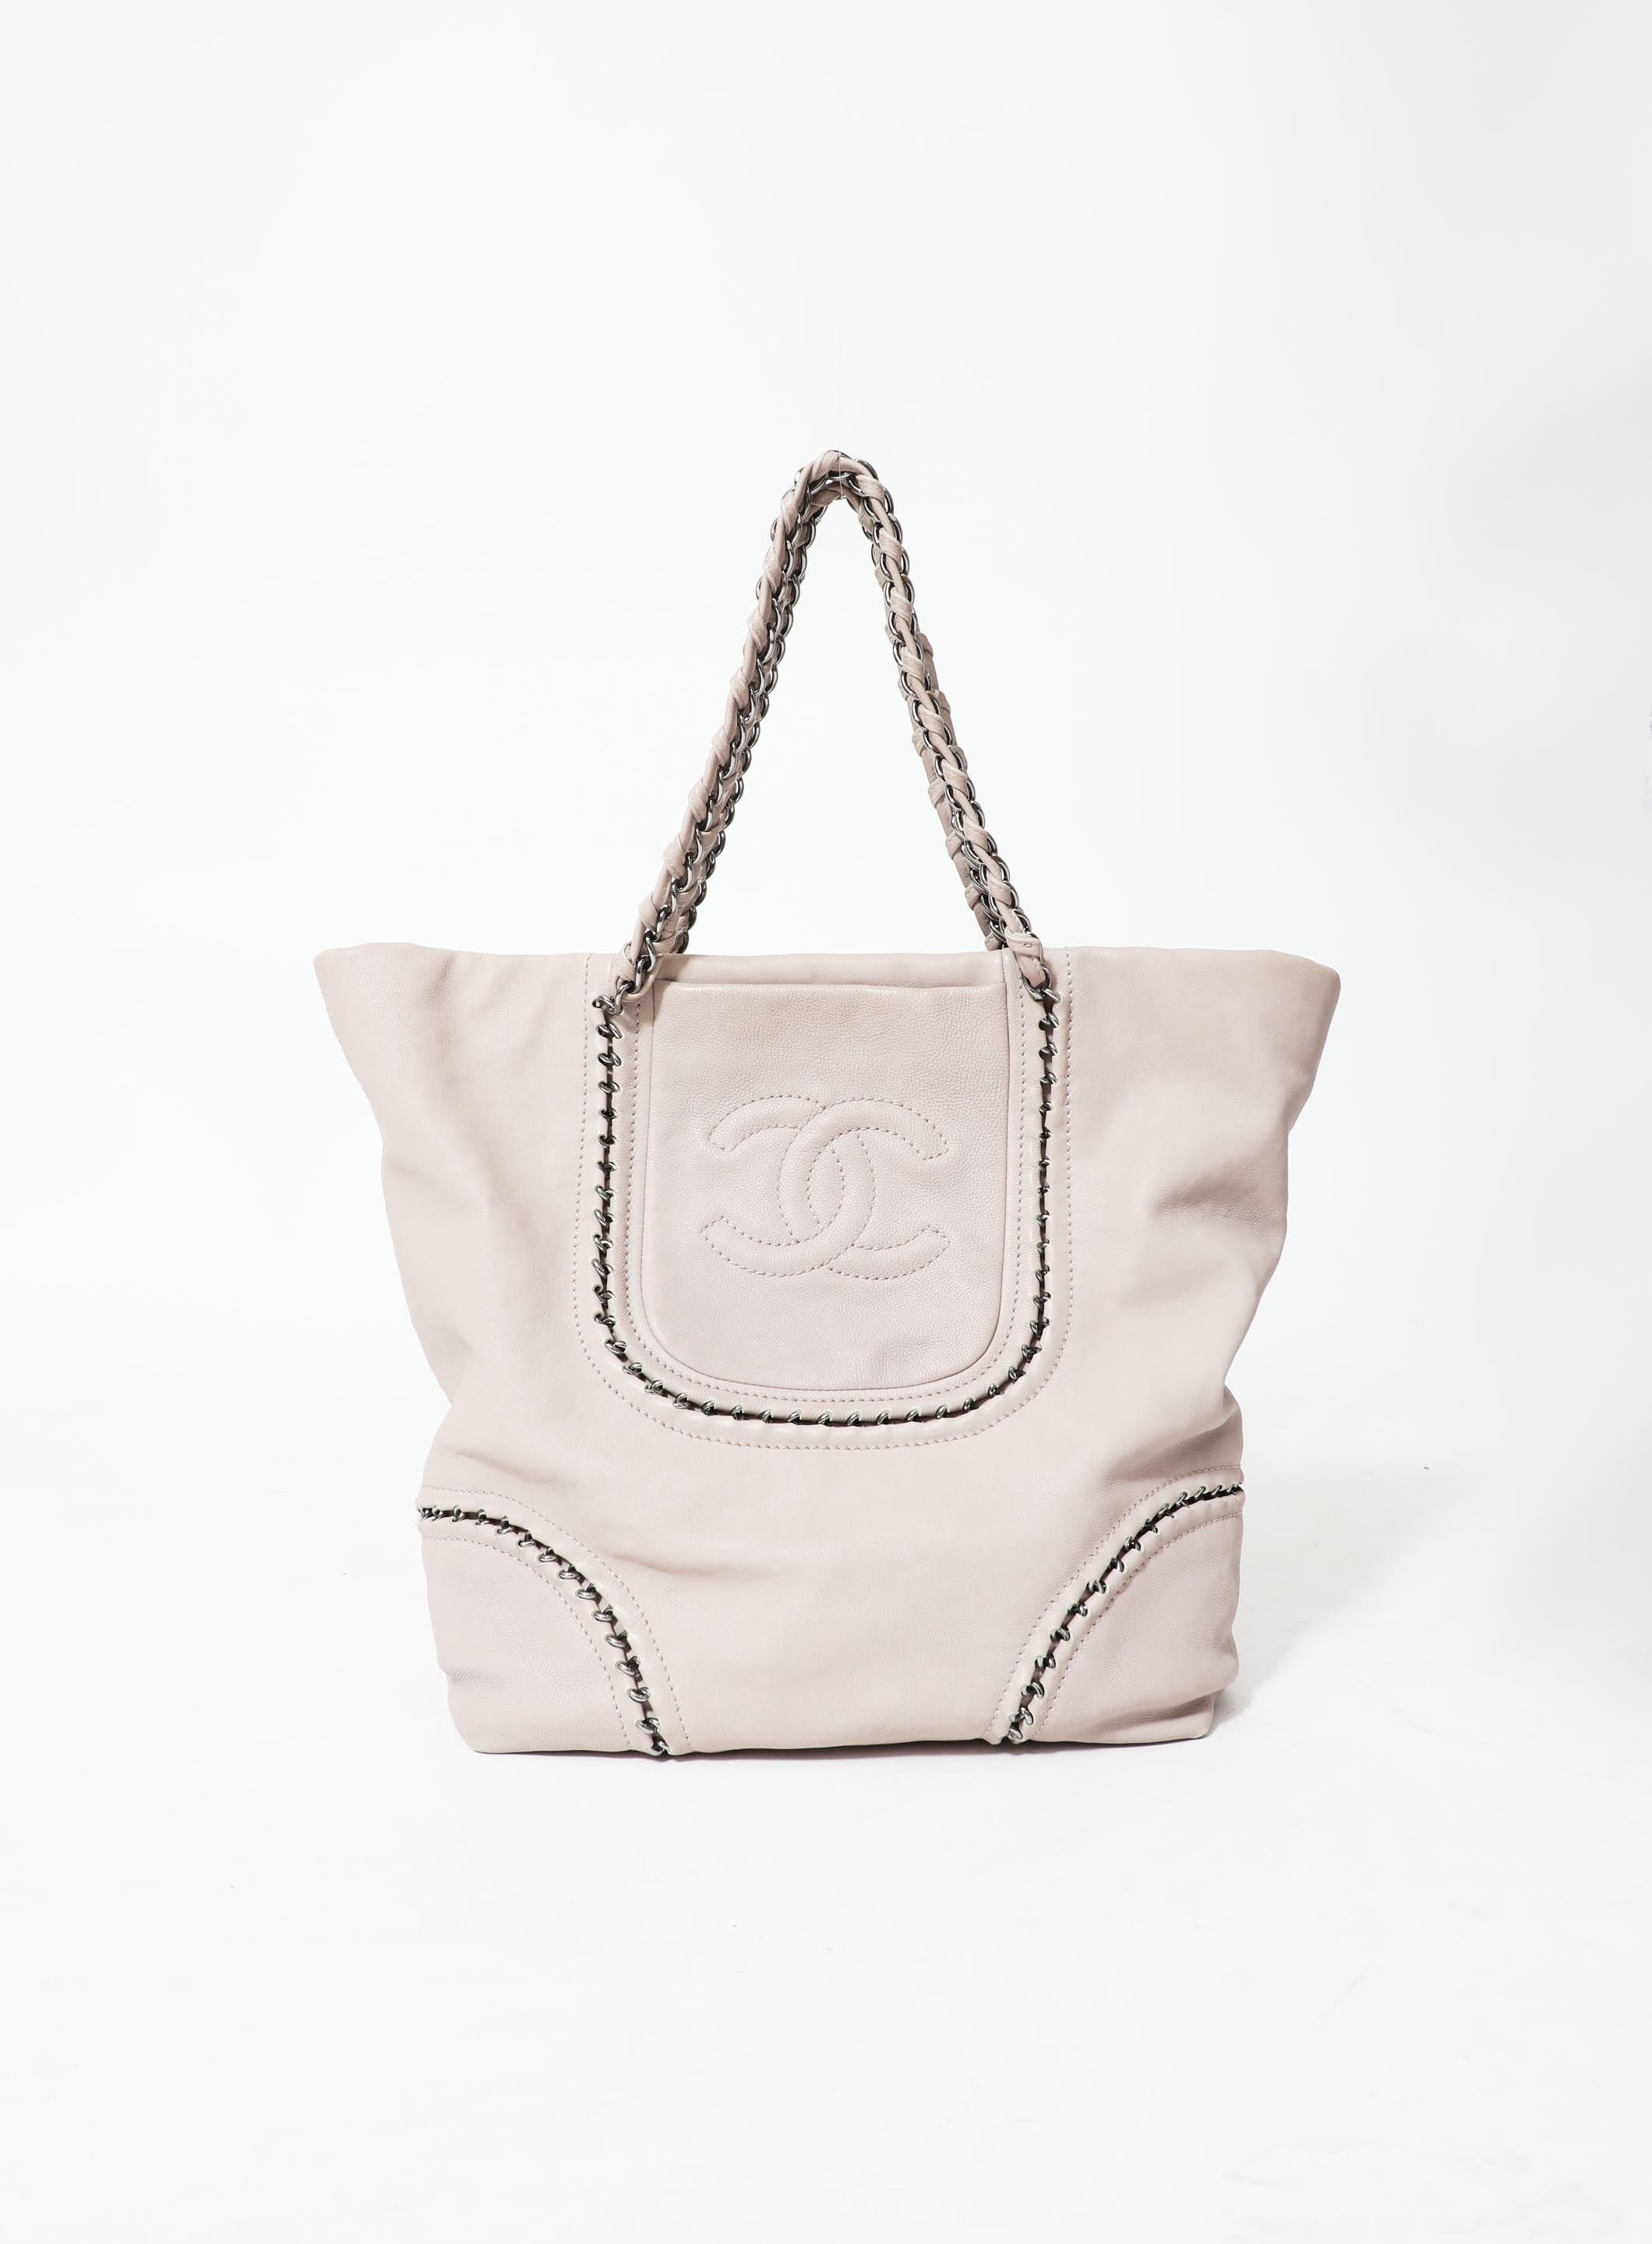 CHANEL Calfskin Large East West Modern Chain Tote White 895923